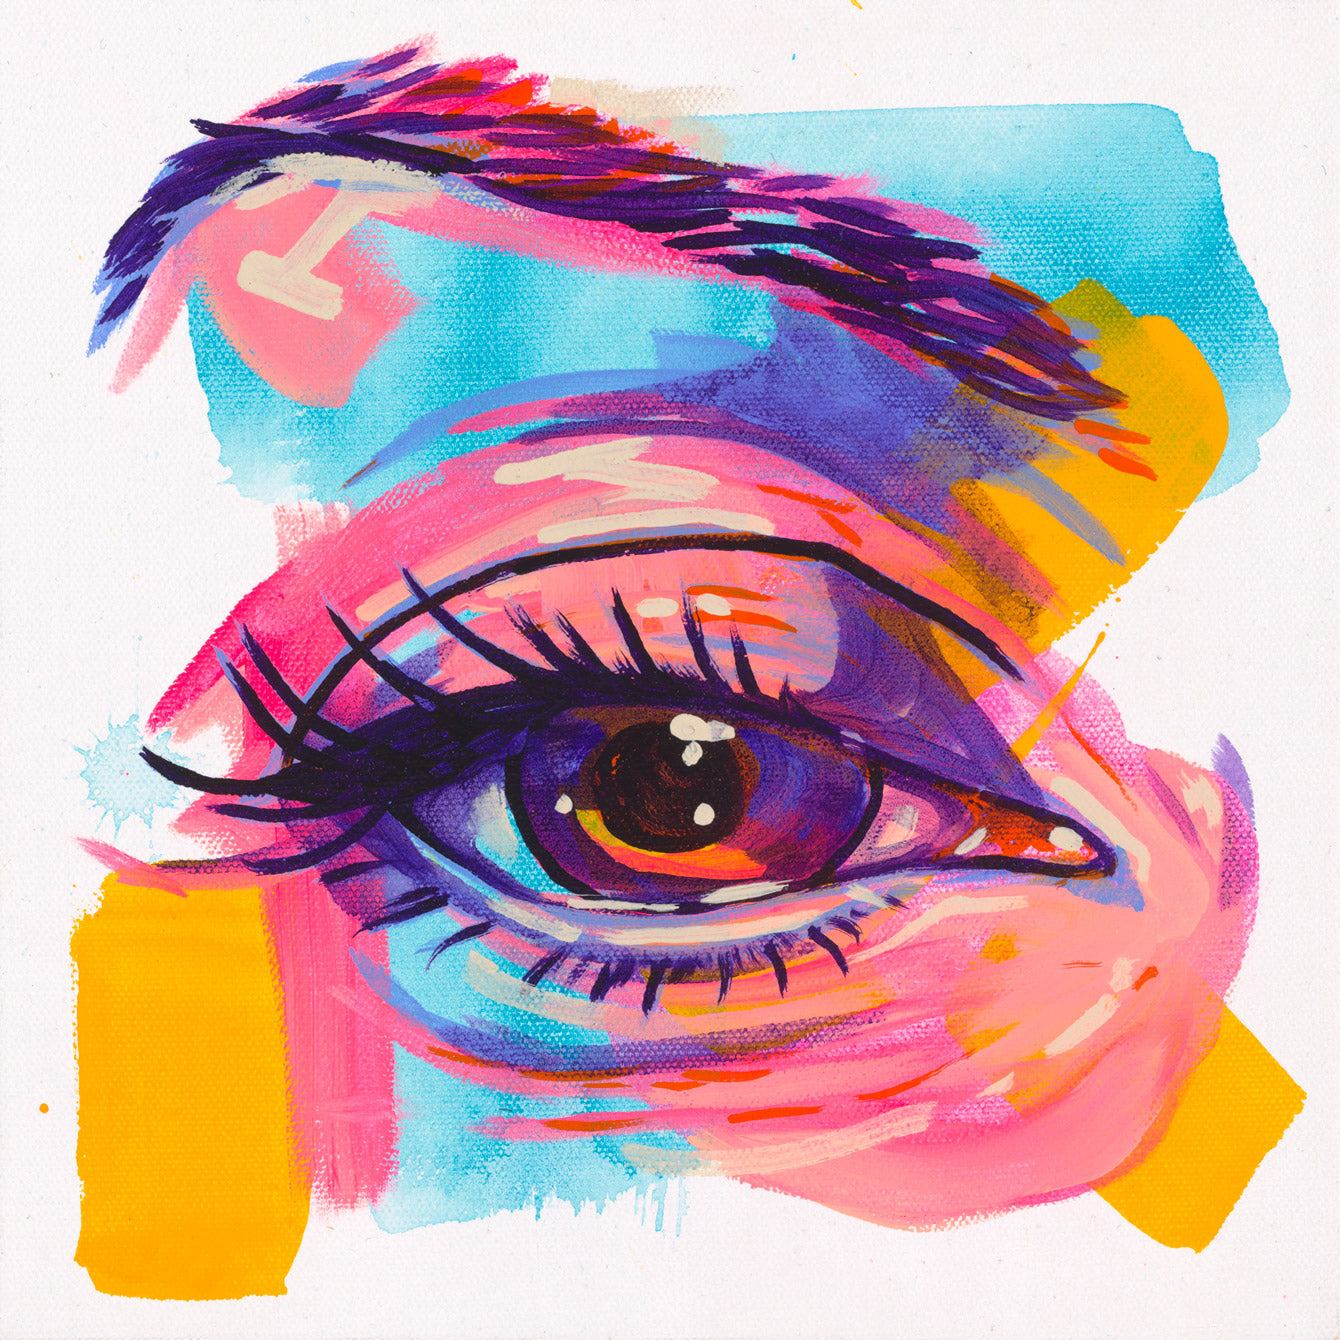 The Tracy Piper's vibrant figurative eye painting "Anna Scott" is available at Voss Gallery, San Francisco for $250.